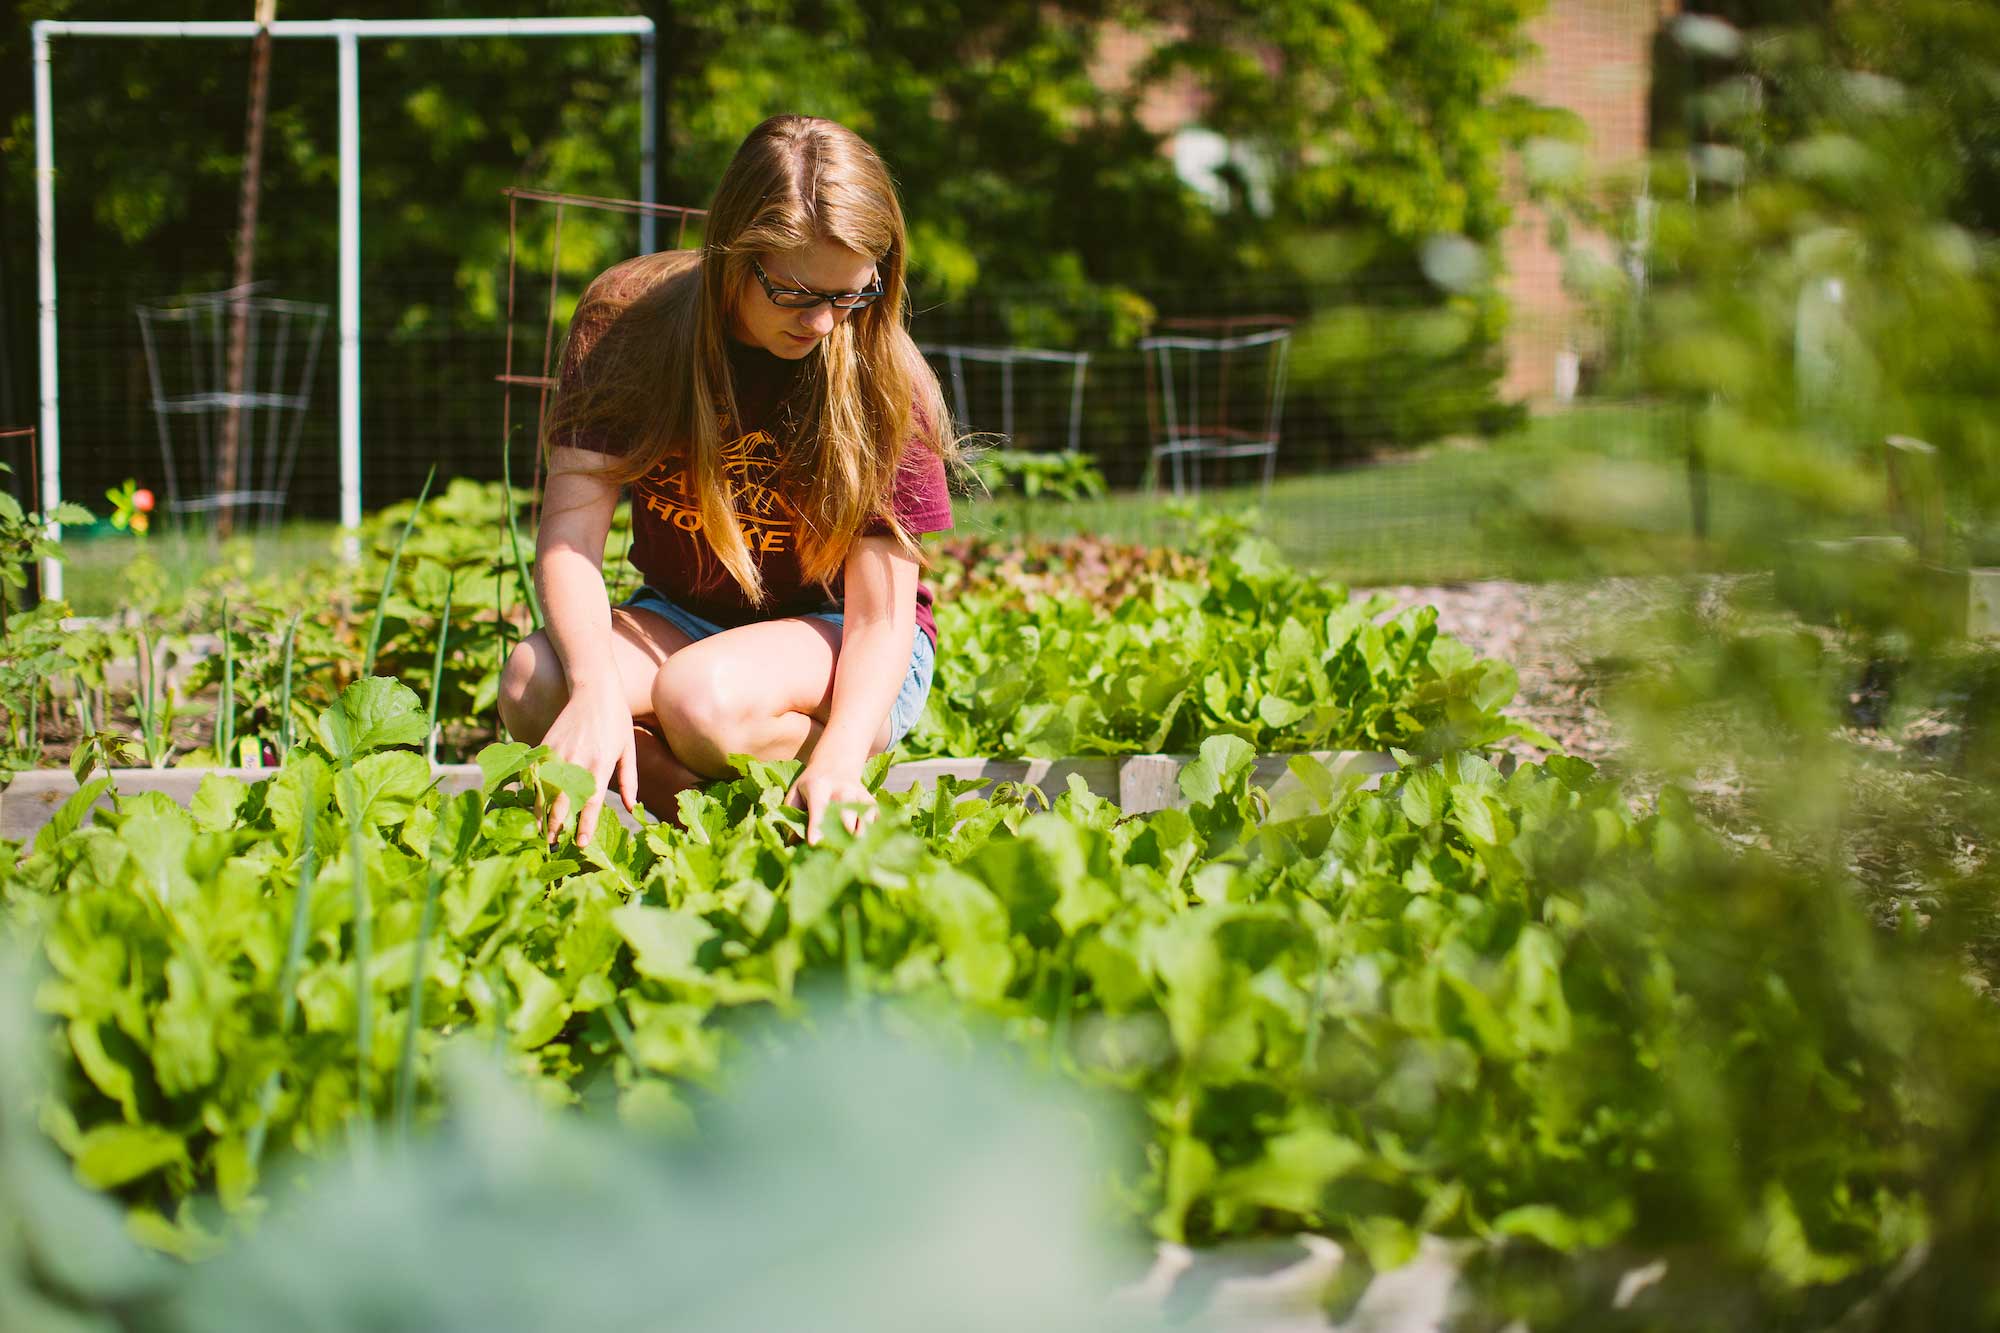 A calvin student works in the community garden.